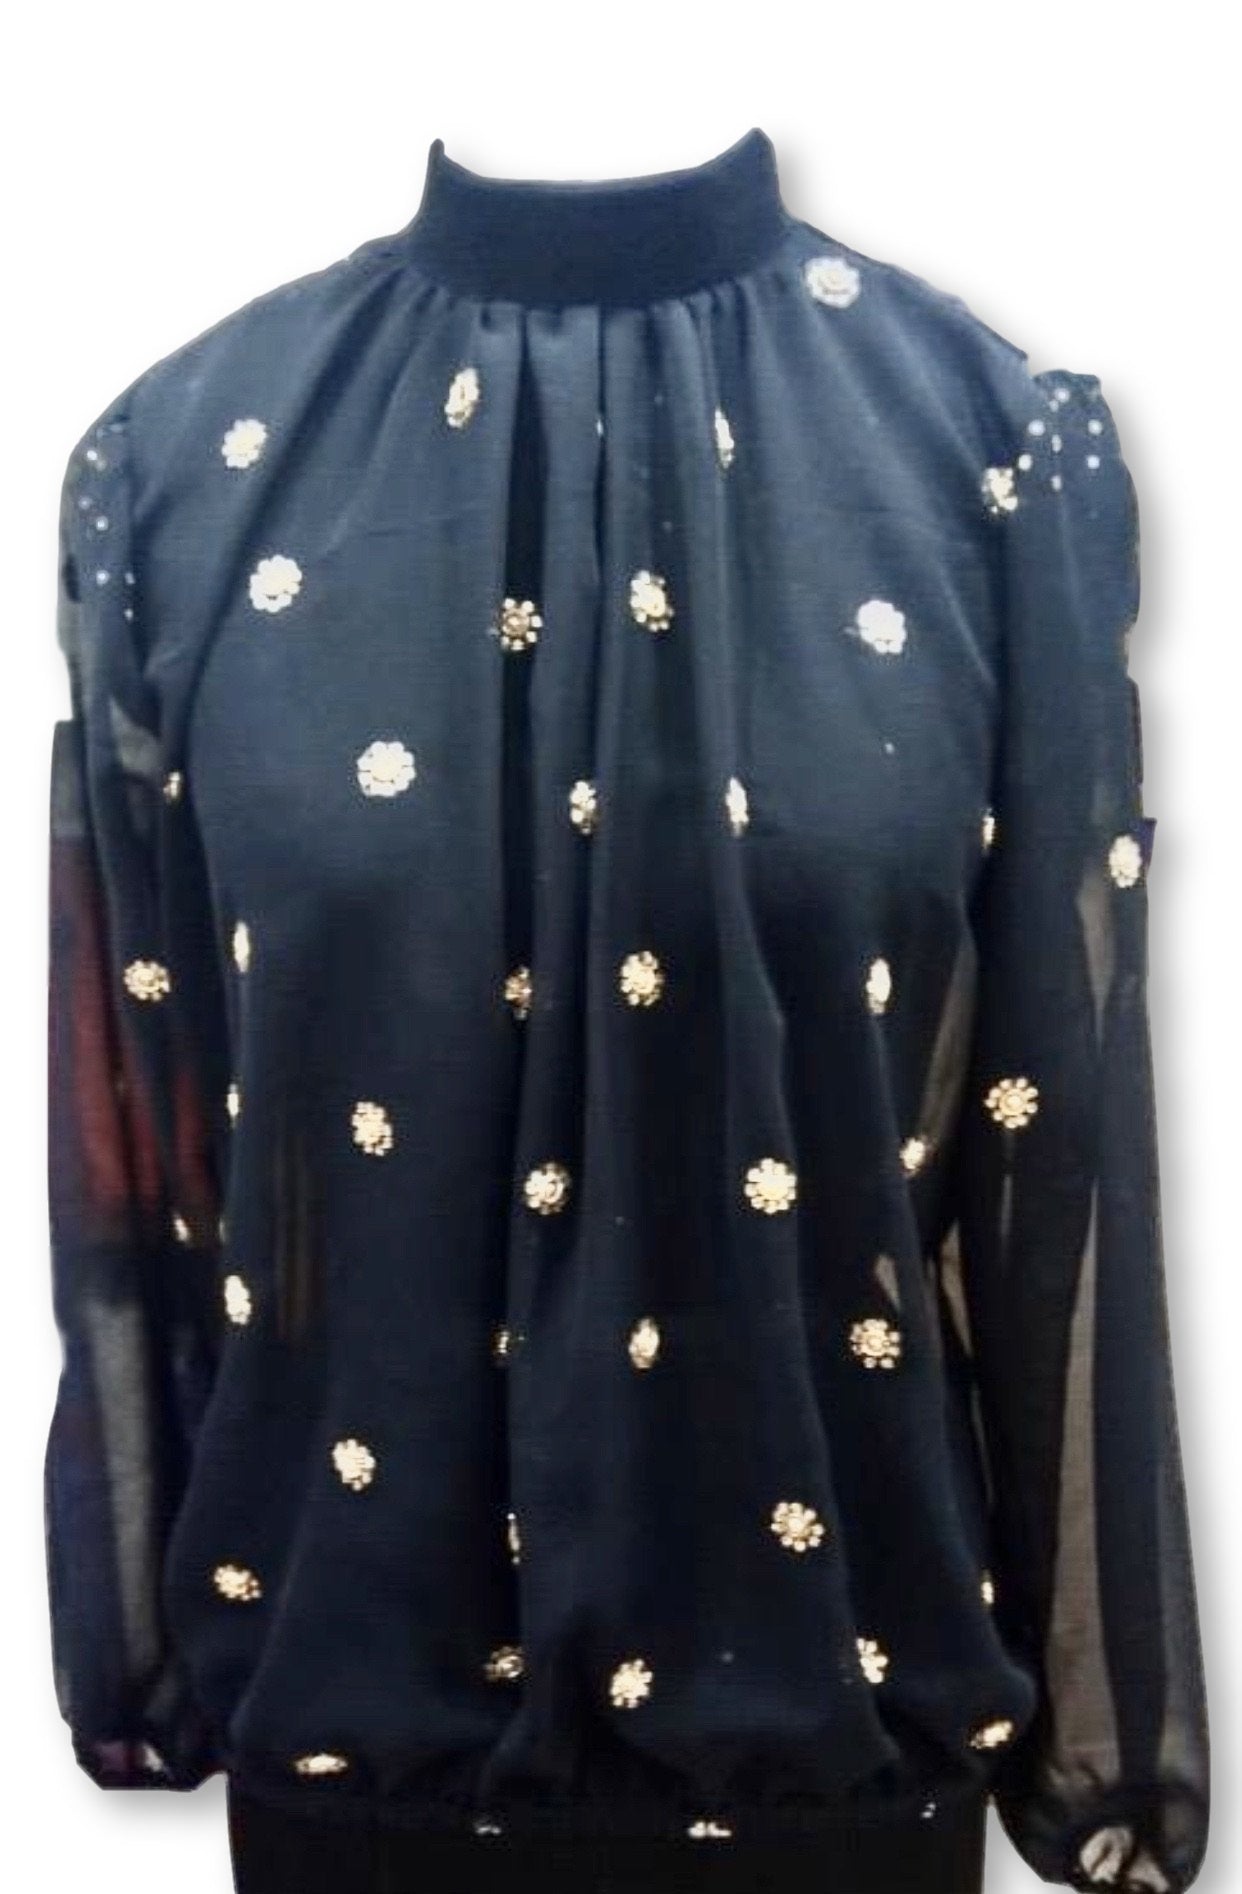 ENTICE BLOUSE - Black With Gold Beading